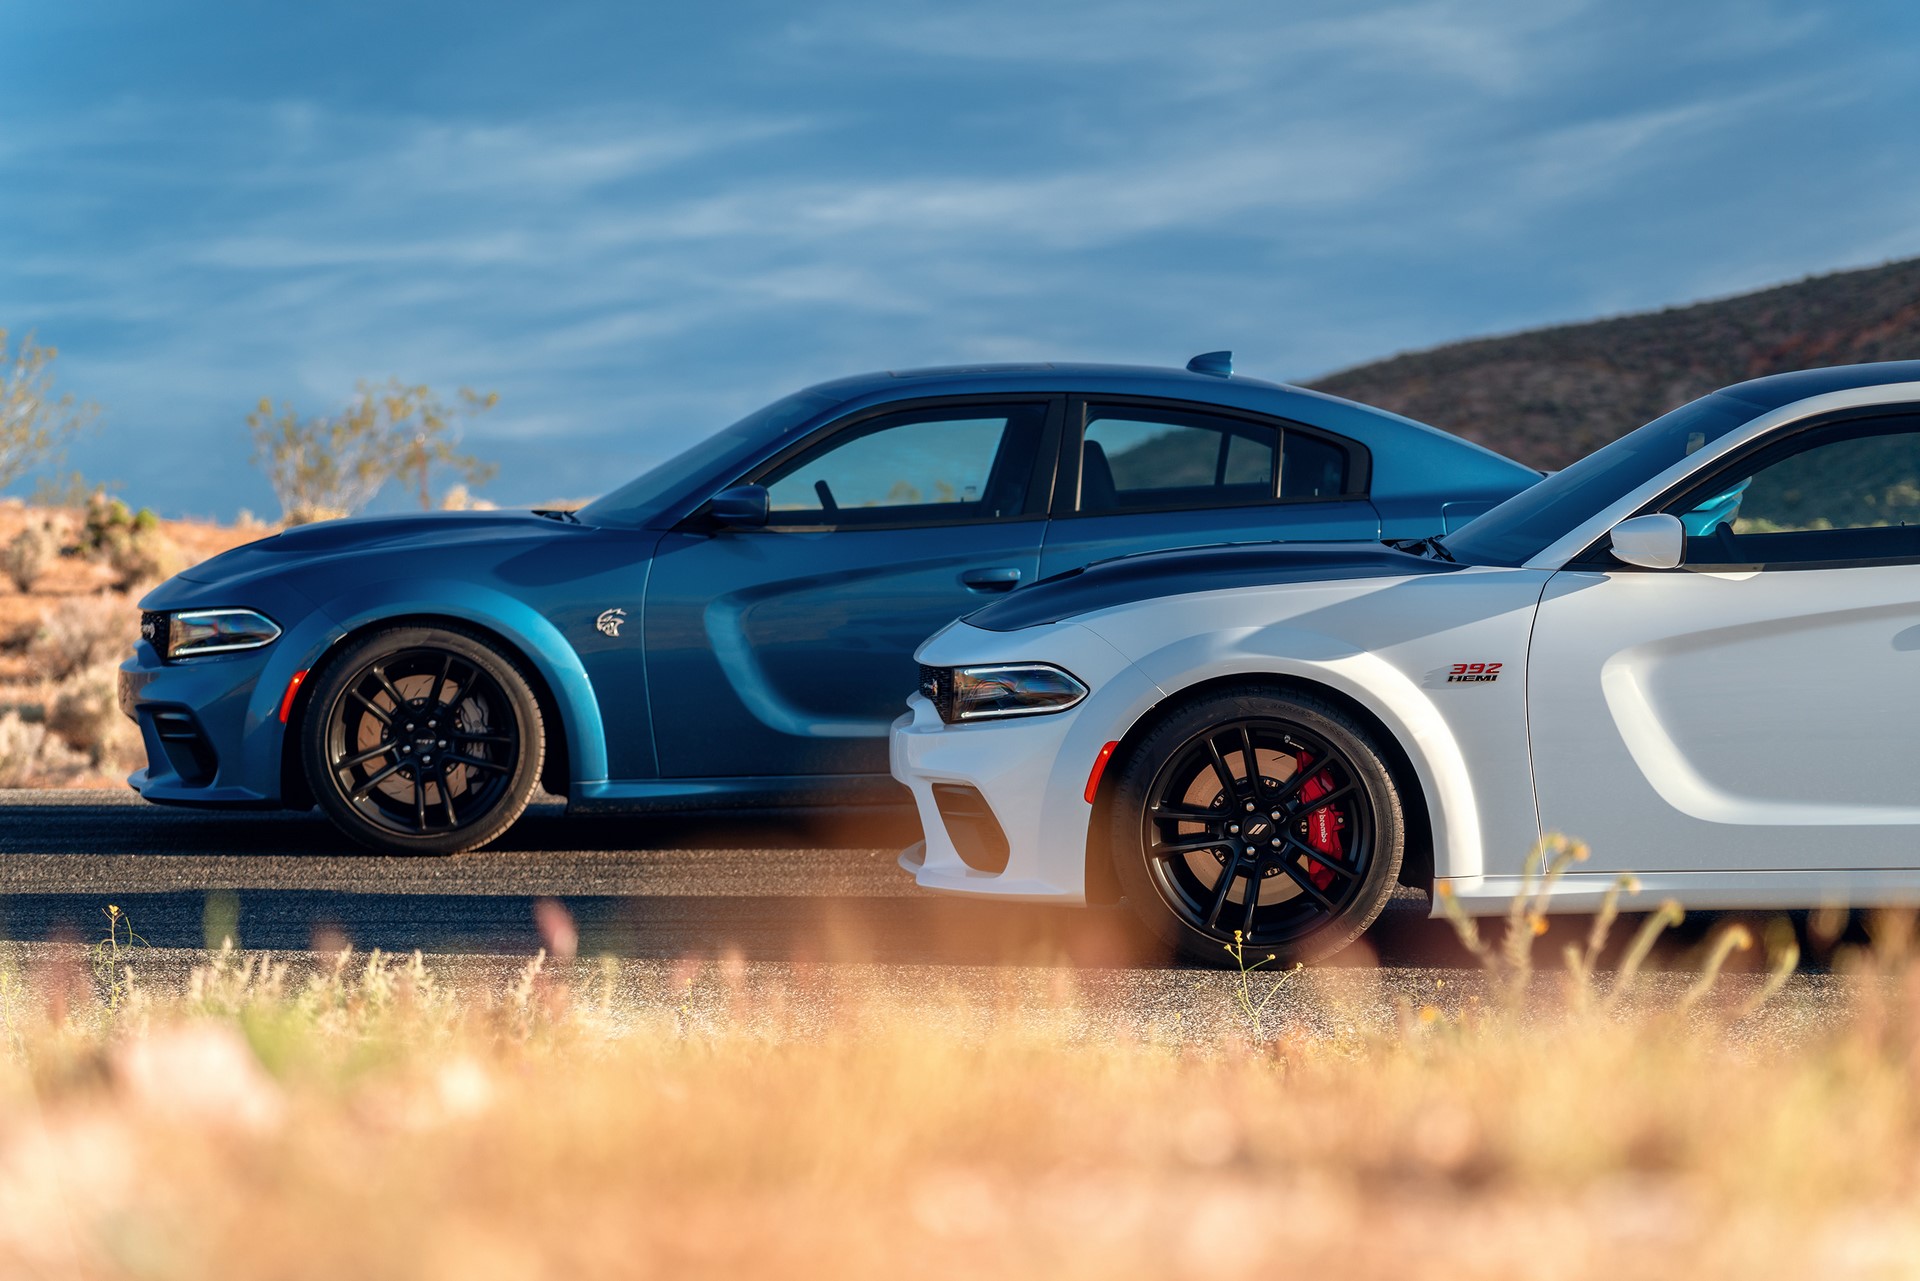 2020 Dodge Charger Scat Pack Widebody (Front) and 2020 Dodge Charger SRT Hellcat Widebody (Rear)